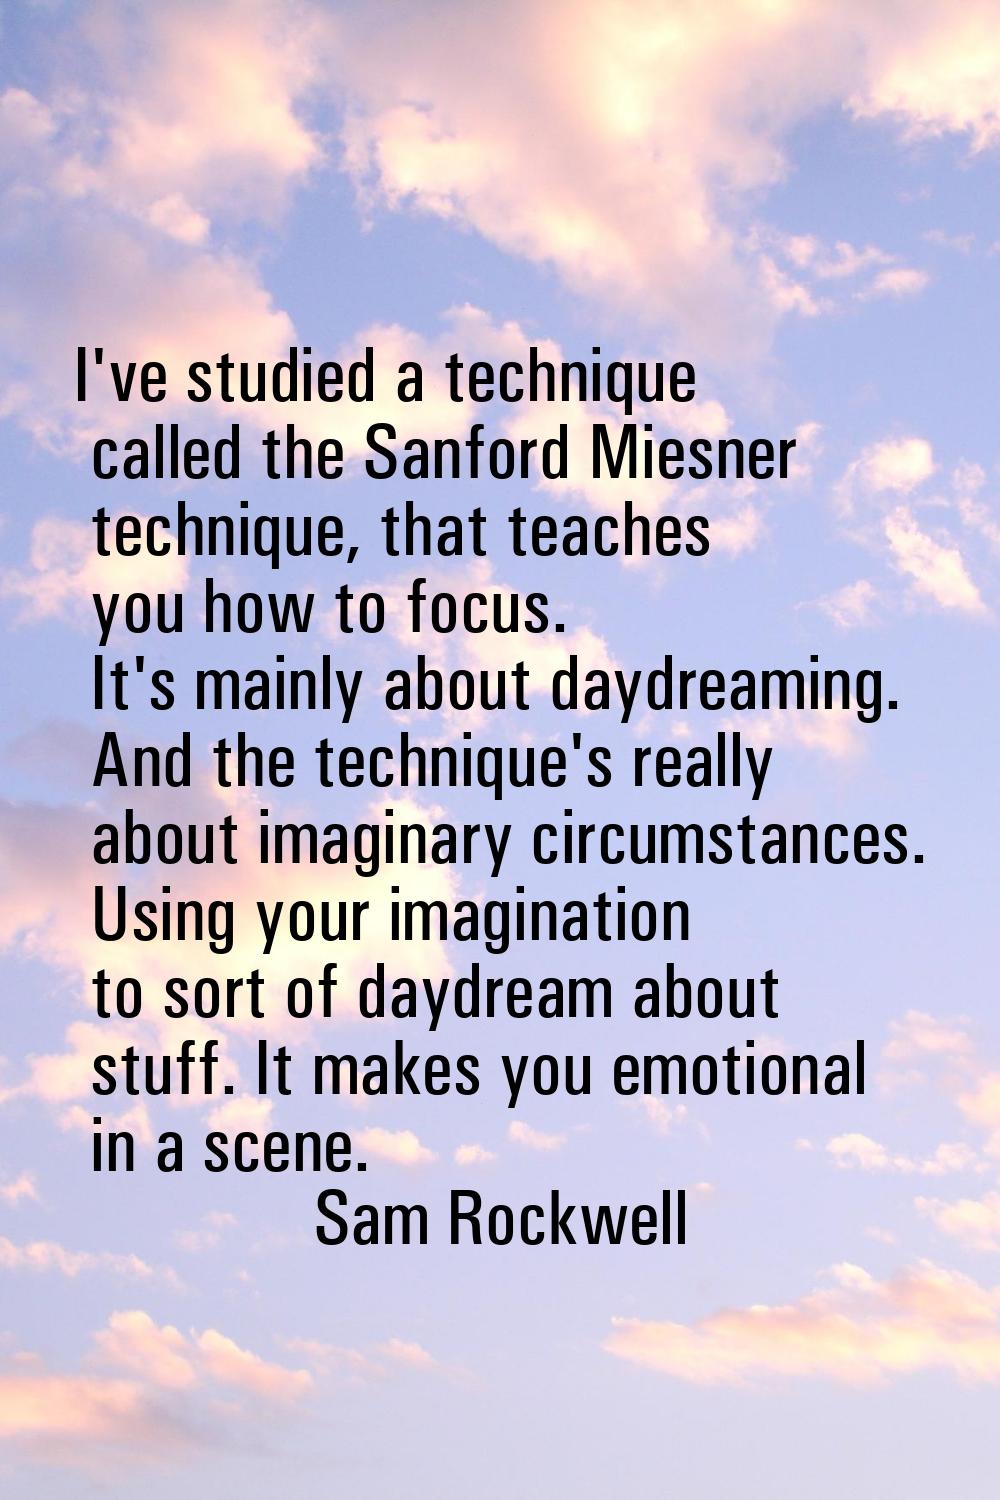 I've studied a technique called the Sanford Miesner technique, that teaches you how to focus. It's 